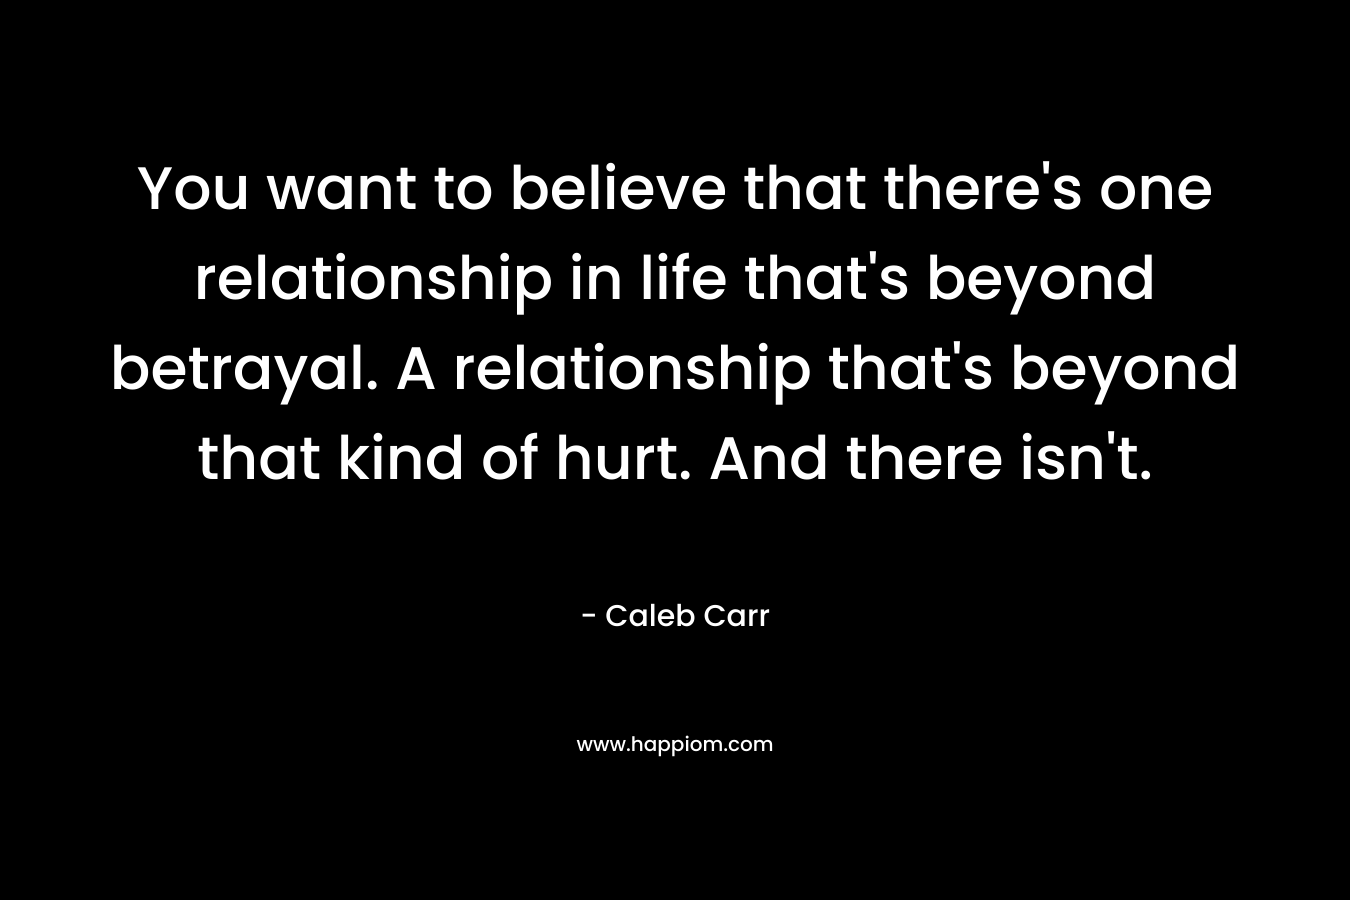 You want to believe that there’s one relationship in life that’s beyond betrayal. A relationship that’s beyond that kind of hurt. And there isn’t. – Caleb Carr